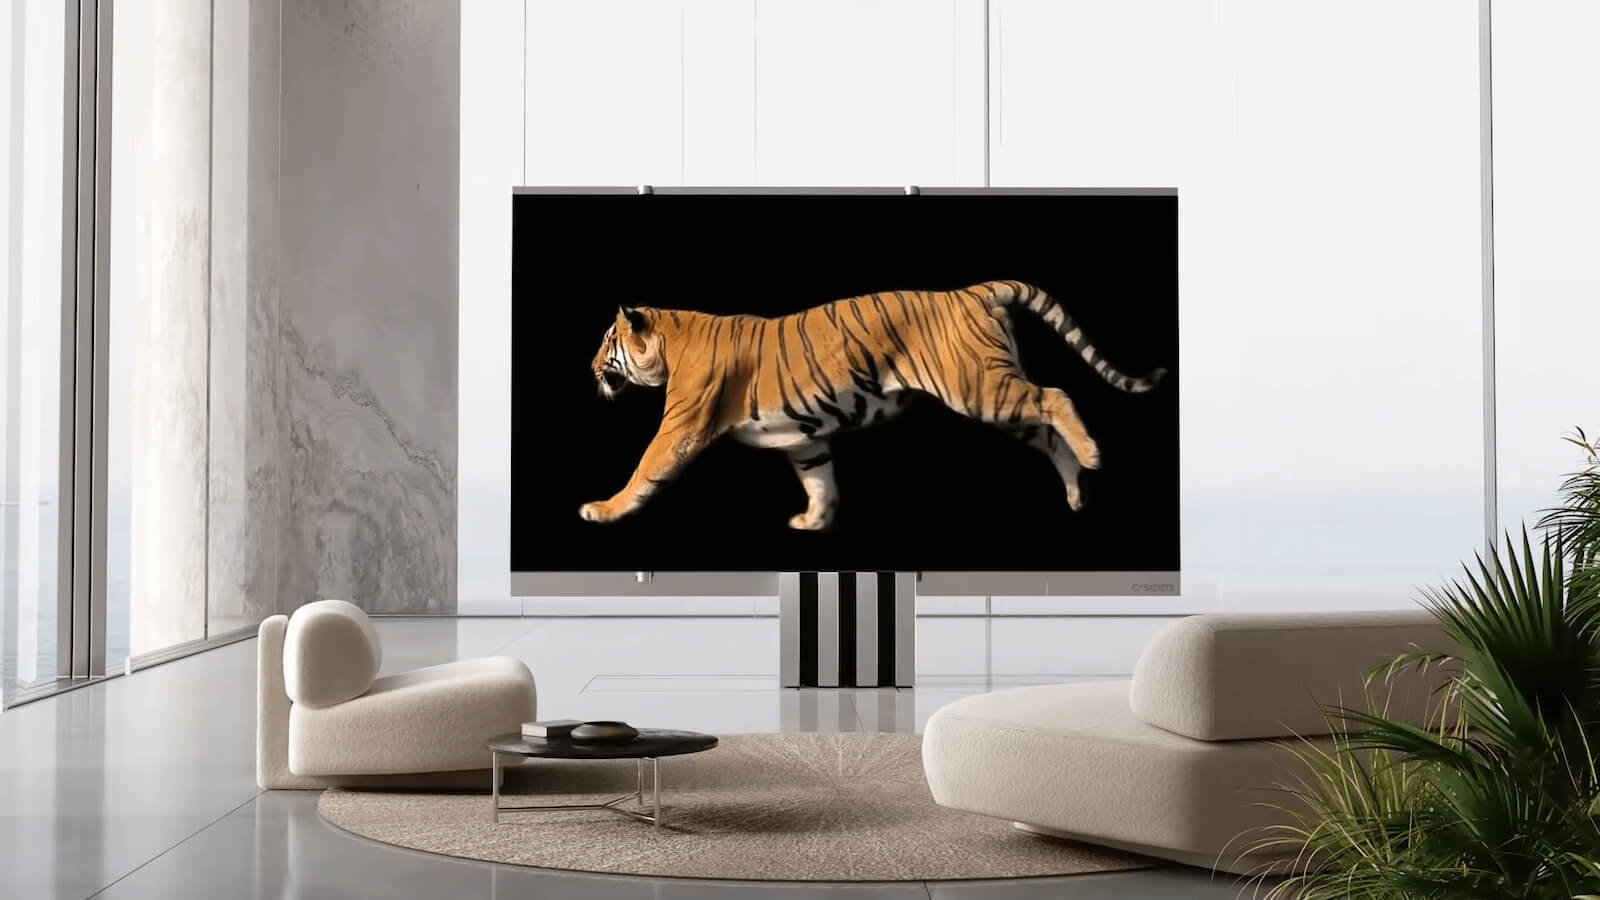 C SEED M1 indoor unfolding TV expands like an envelope to reveal a 165-inch display